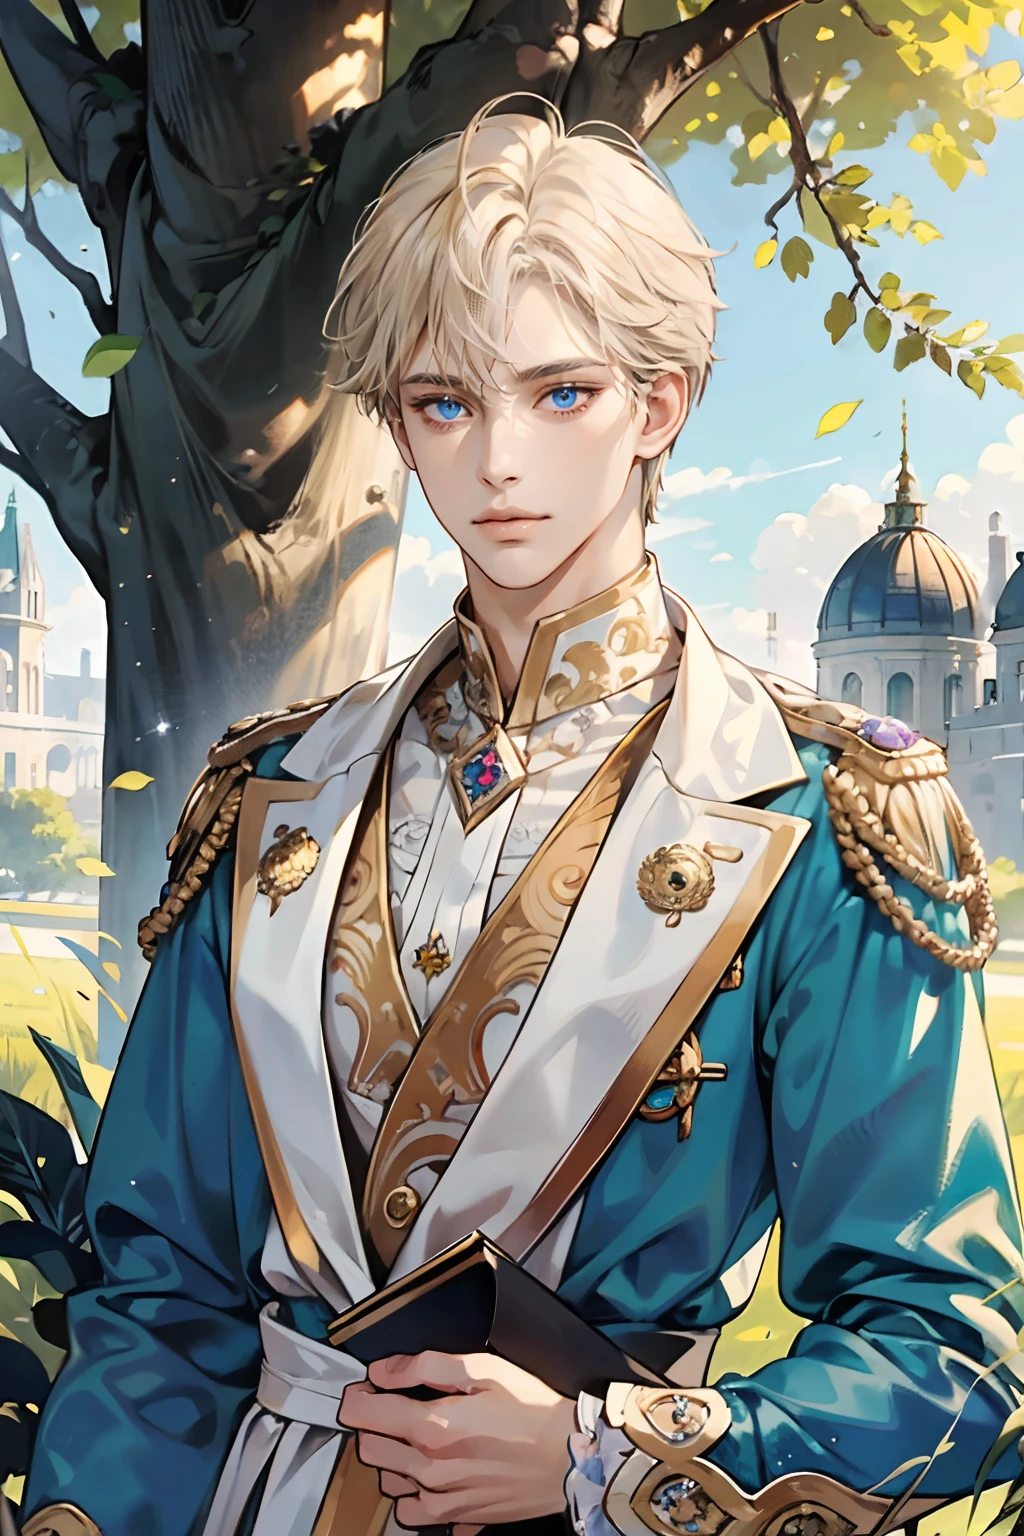 (tmasterpiece, high resolution, ultra - detailed:1.0), (1boy, adult male), Perfect male body,Eyes look at the camera, (prince:1.3), Delicate eyes and delicate face, Extremely detailed CG, Unity 8k wallpaper, Complicated details, solo person, Detailed face, (White royal costume, with short golden hair, Blue eyes, Sad expression), Outdoor, sonoko, Flowers and trees, marbled columns, color difference, Depth of field, dramatic shadow, Ray tracing, Best quality, Portrait